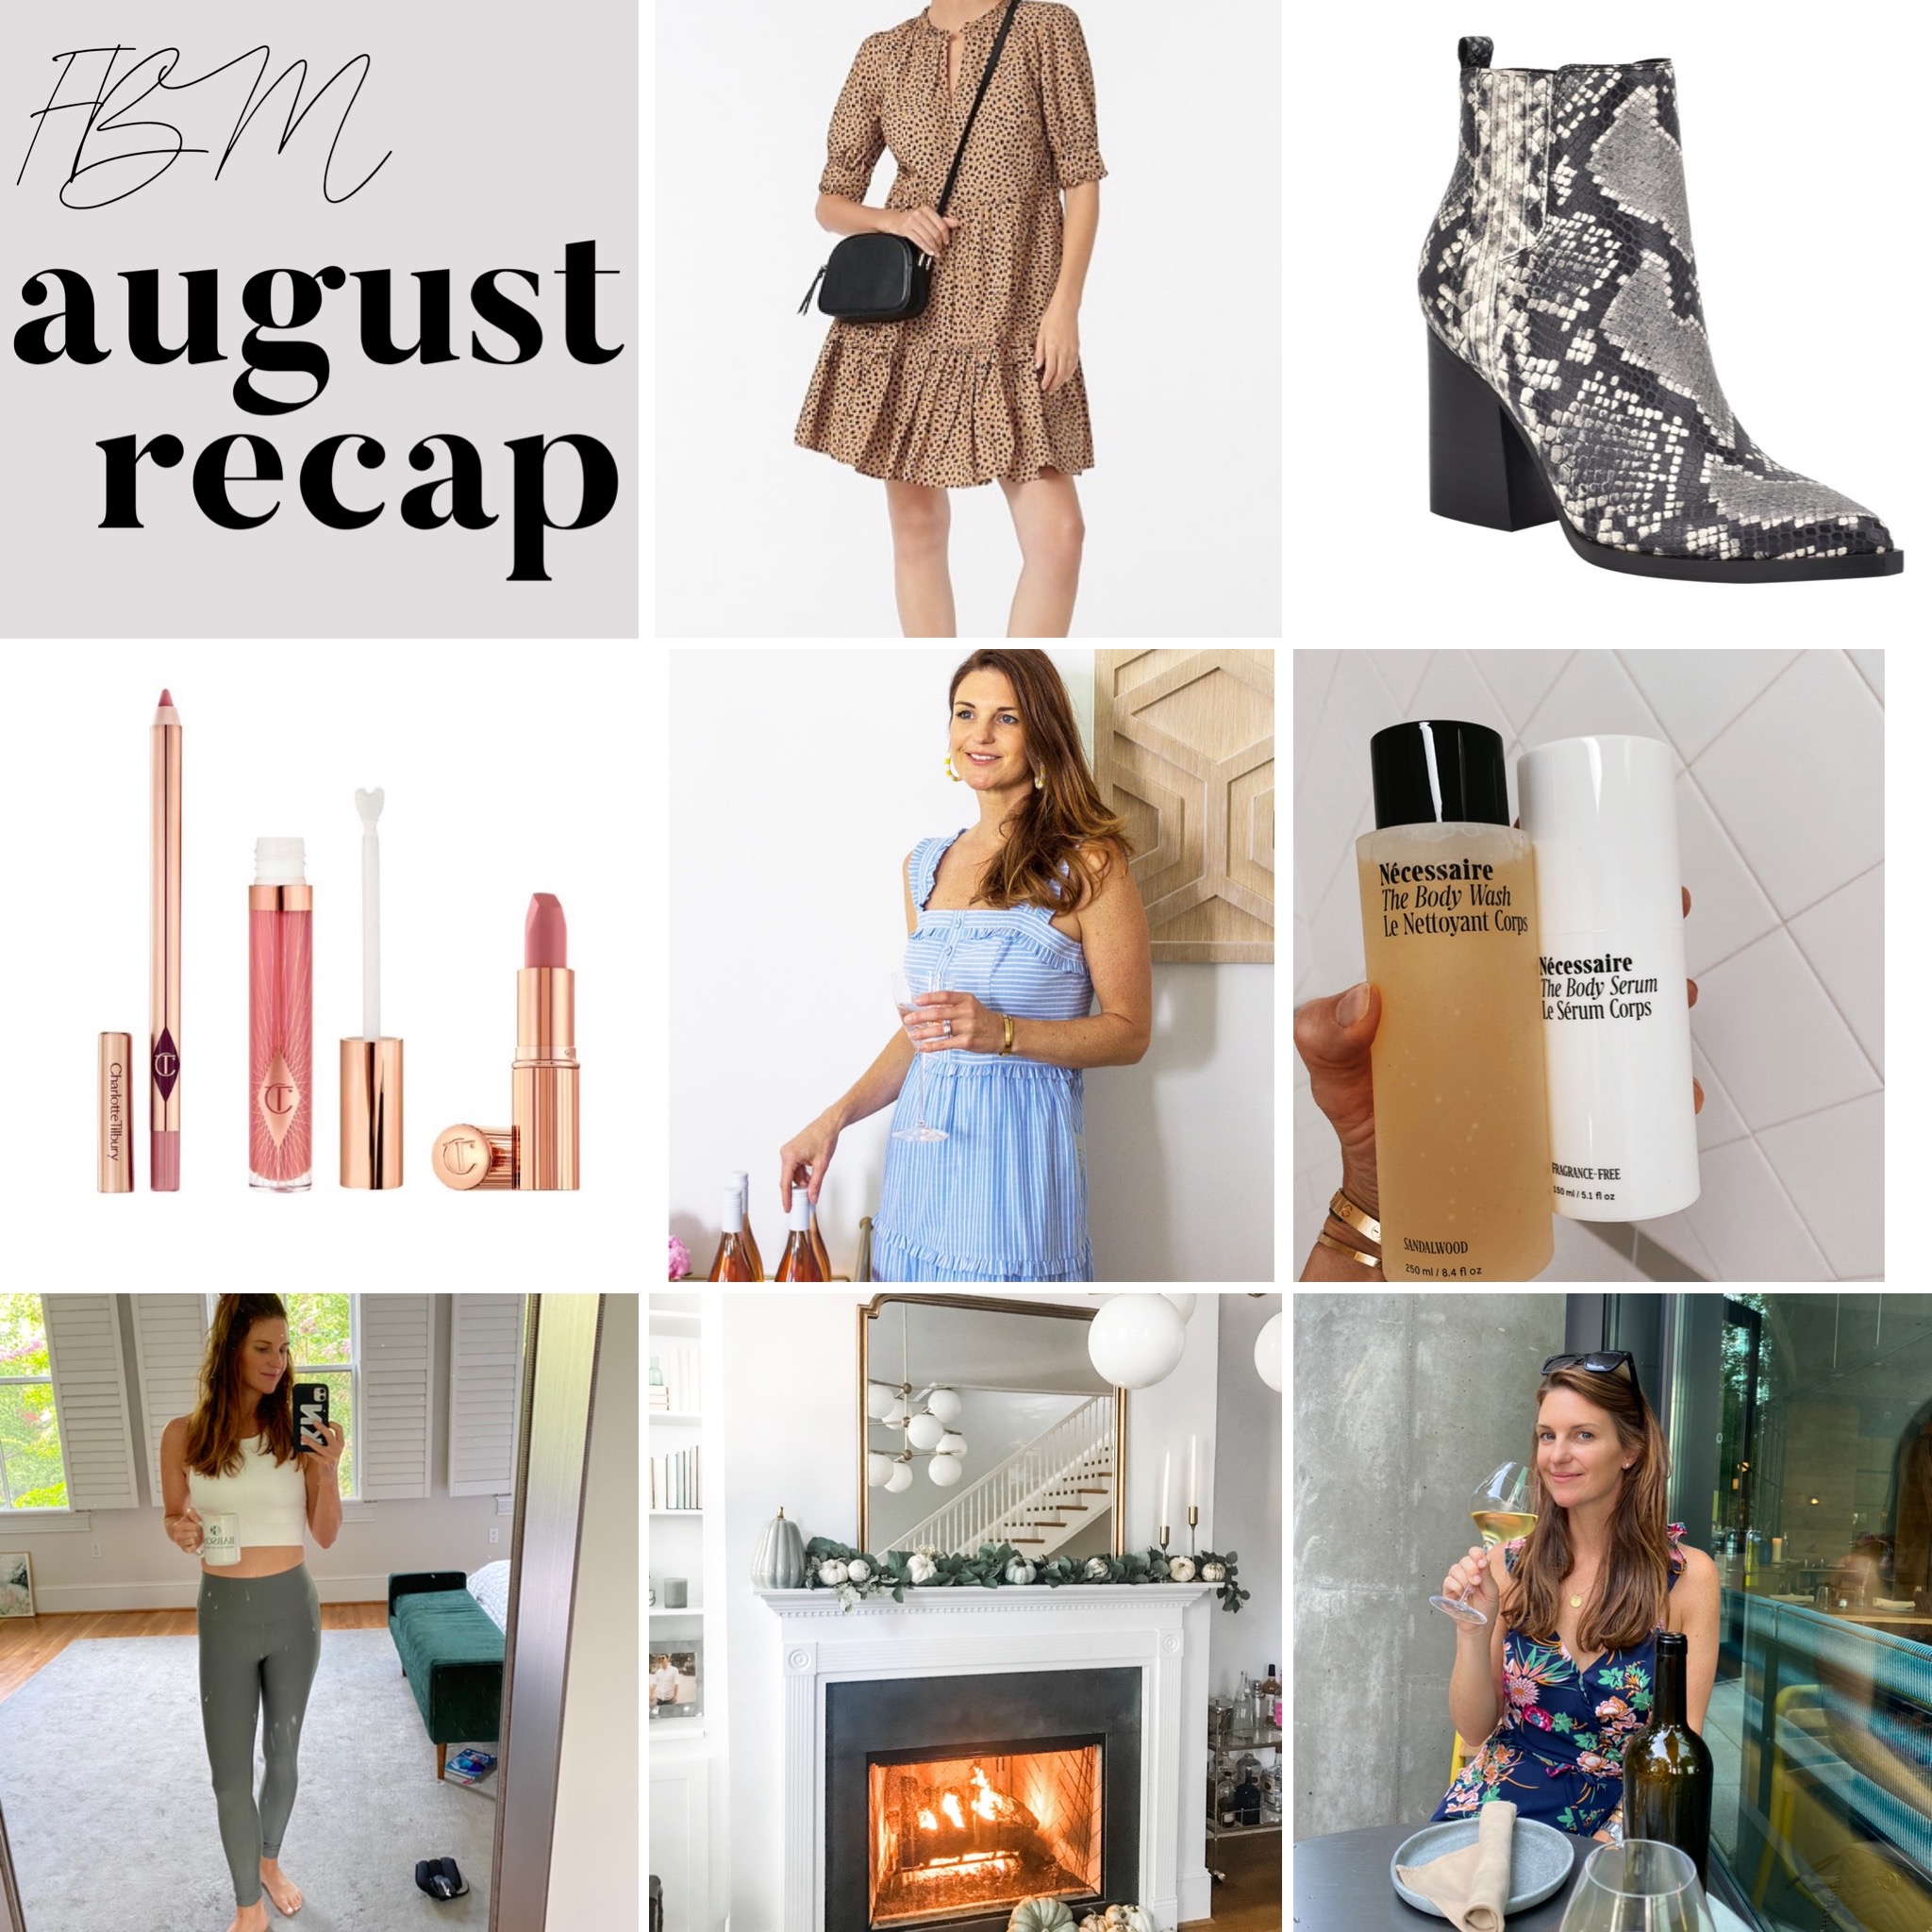 August recap from finding beauty mom